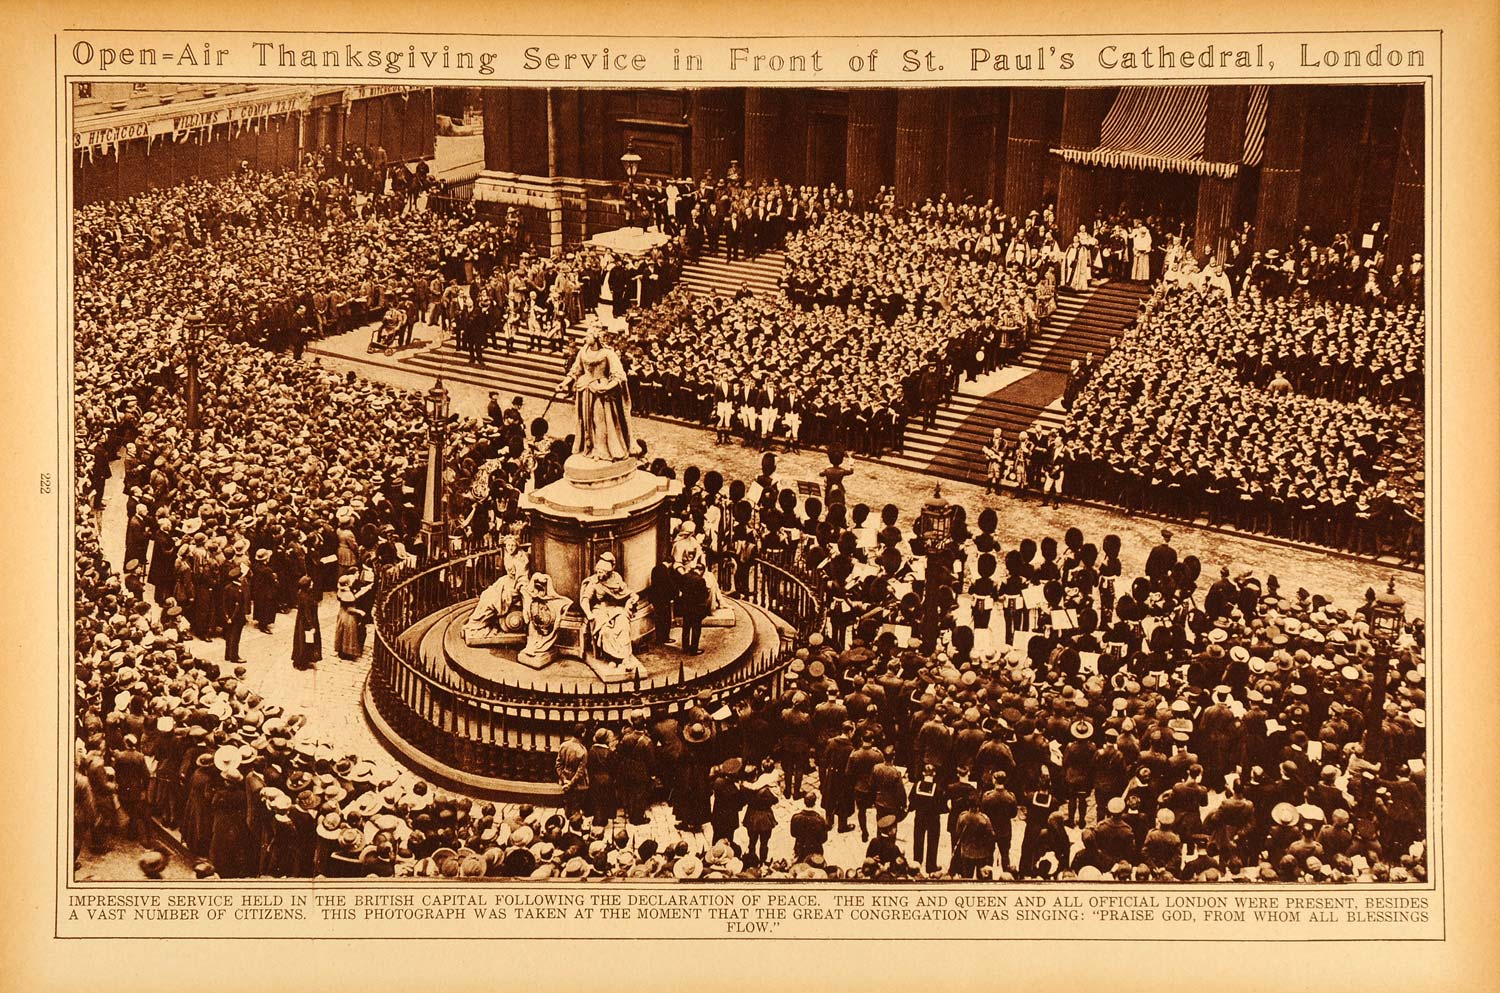 1922 Rotogravure World War I Thanksgiving Service St. Paul's Cathedral London